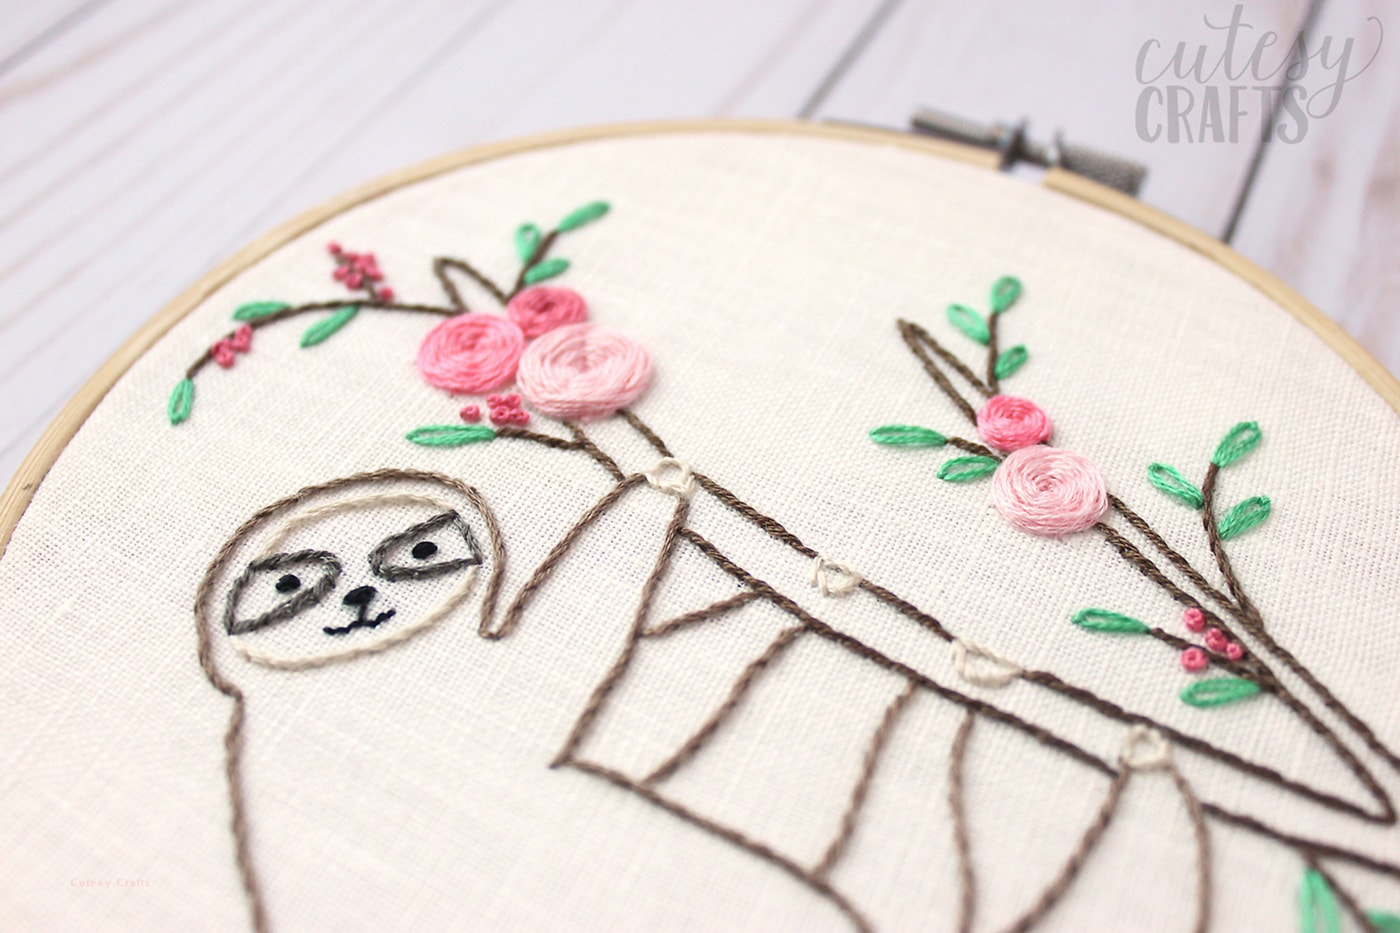 Free Embroidery Patterns Adorable Sloth Hand Embroidery Pattern The Polka Dot Chair